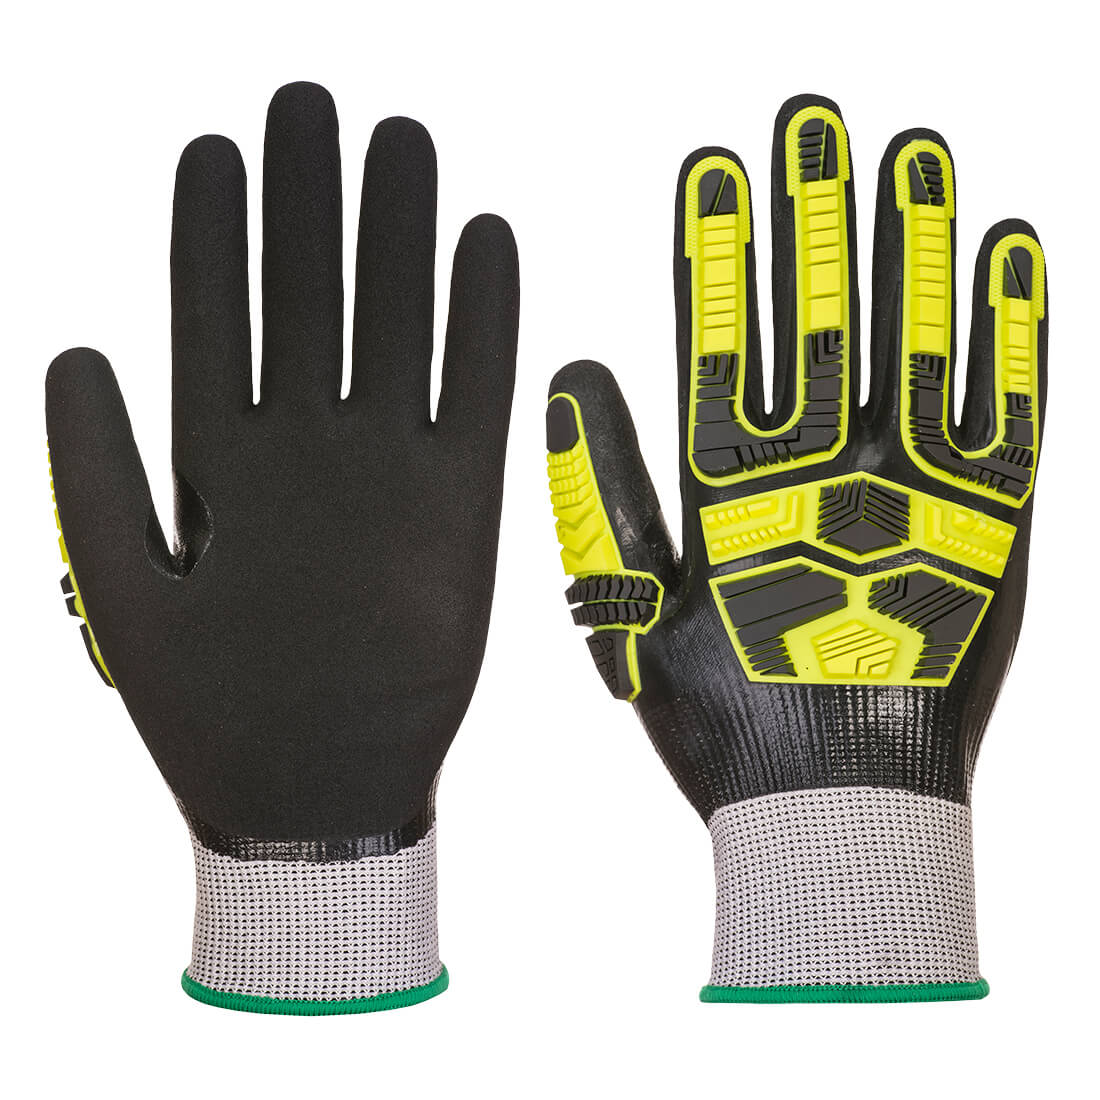 AP55 Portwest® Level 2 Anti Impact A4 Cut Resistant Nitrile Foam Coated Safety Gloves